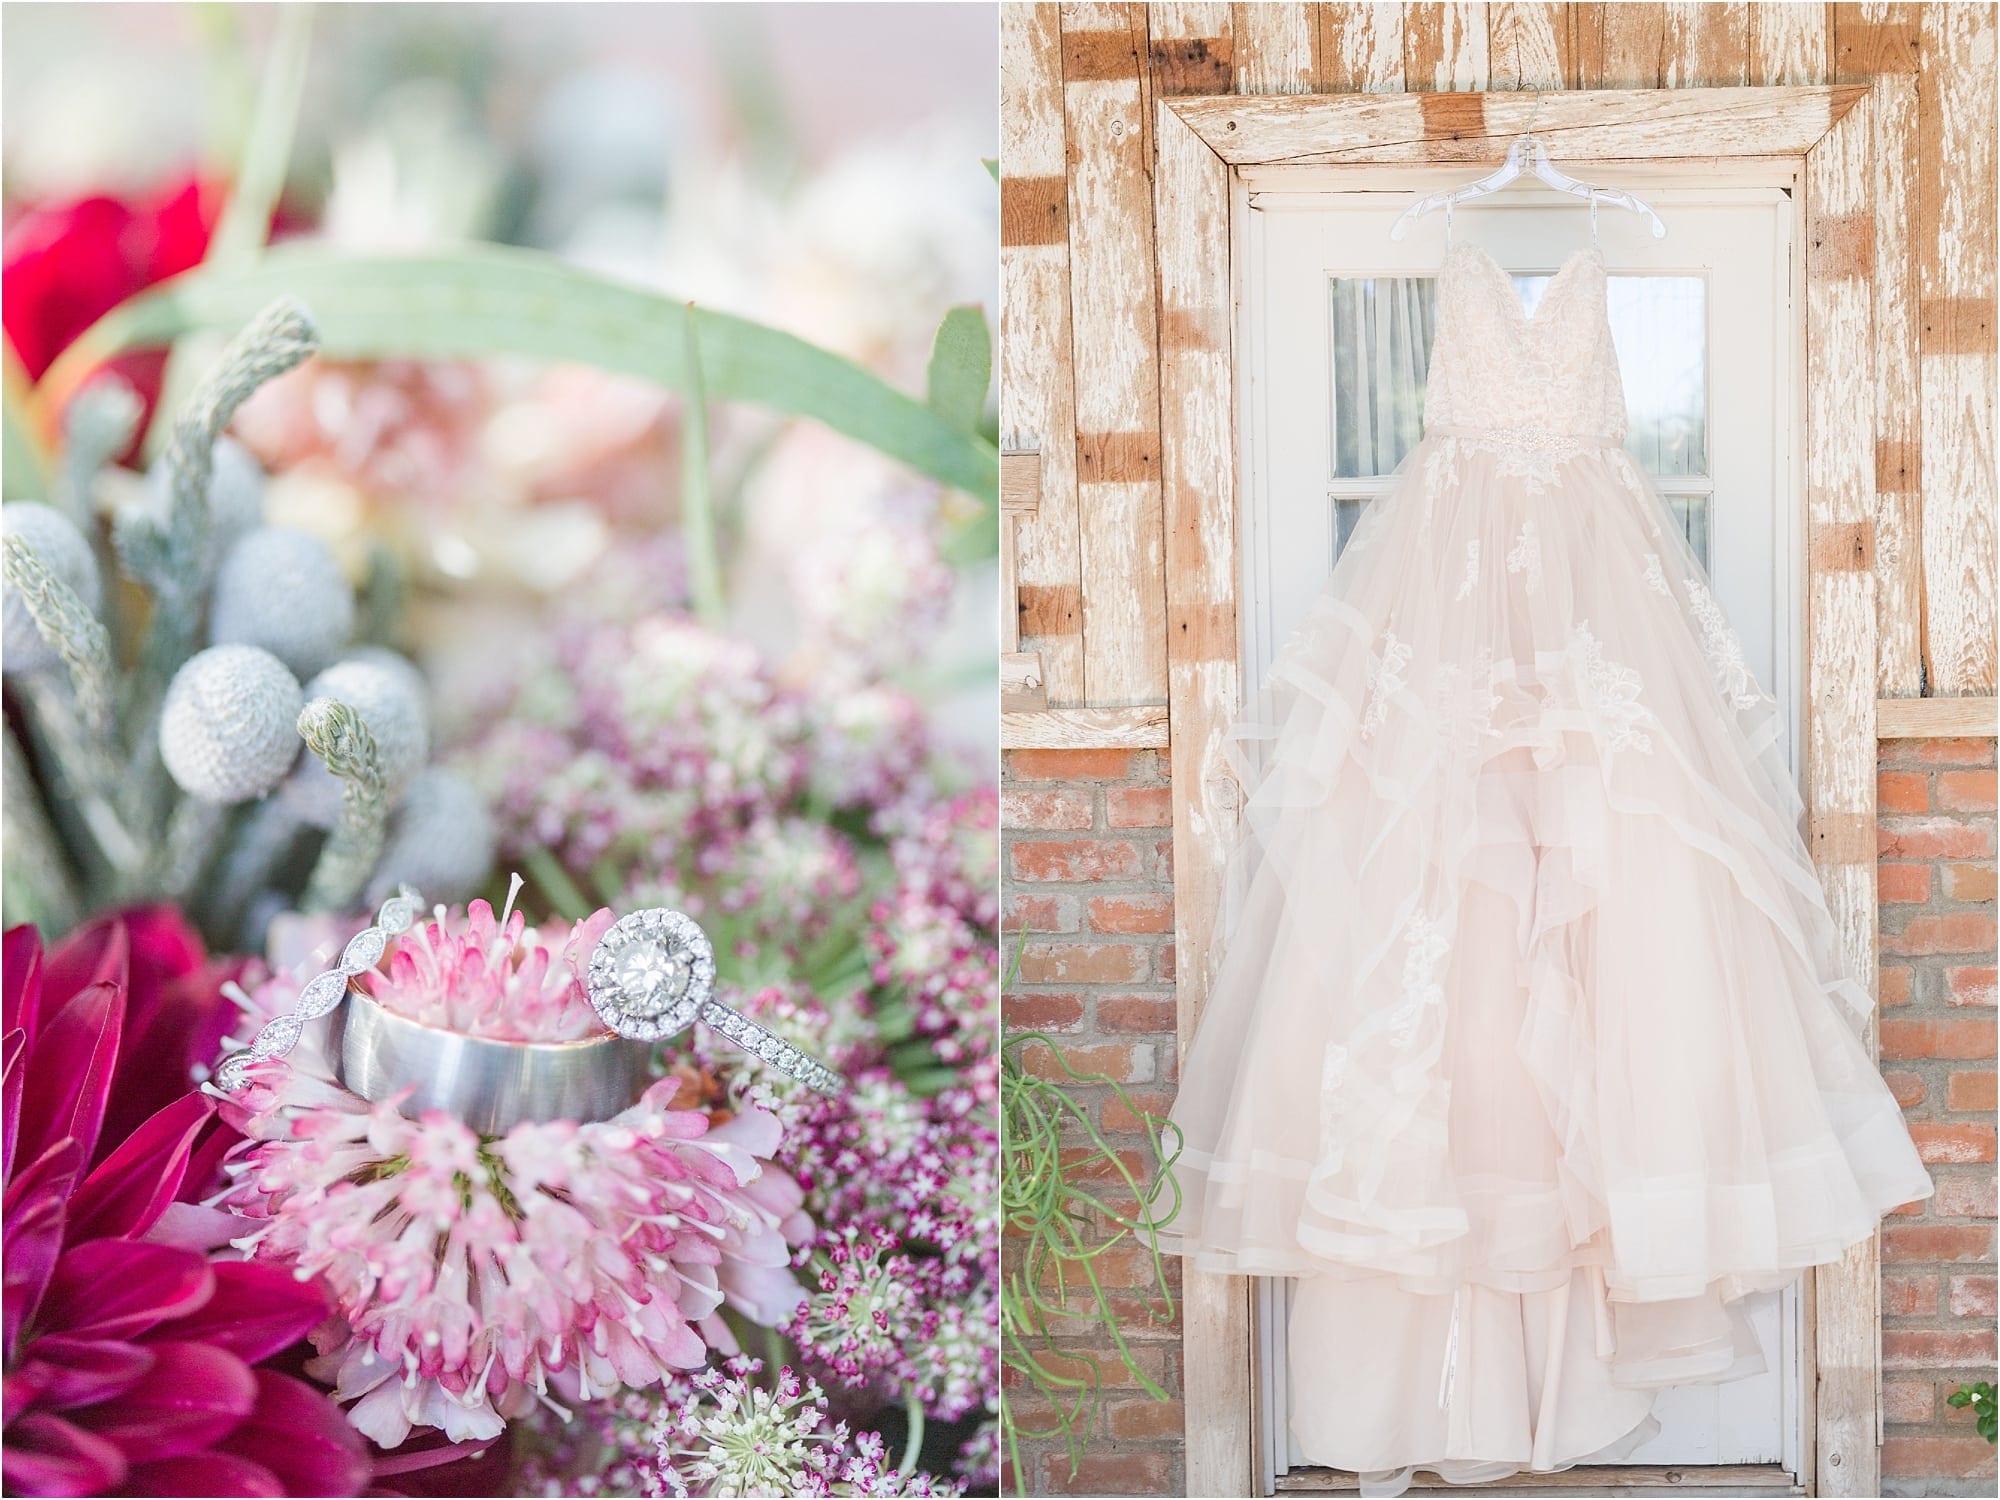 Windmill Winery Bridal Cottage Wedding Dress and florals